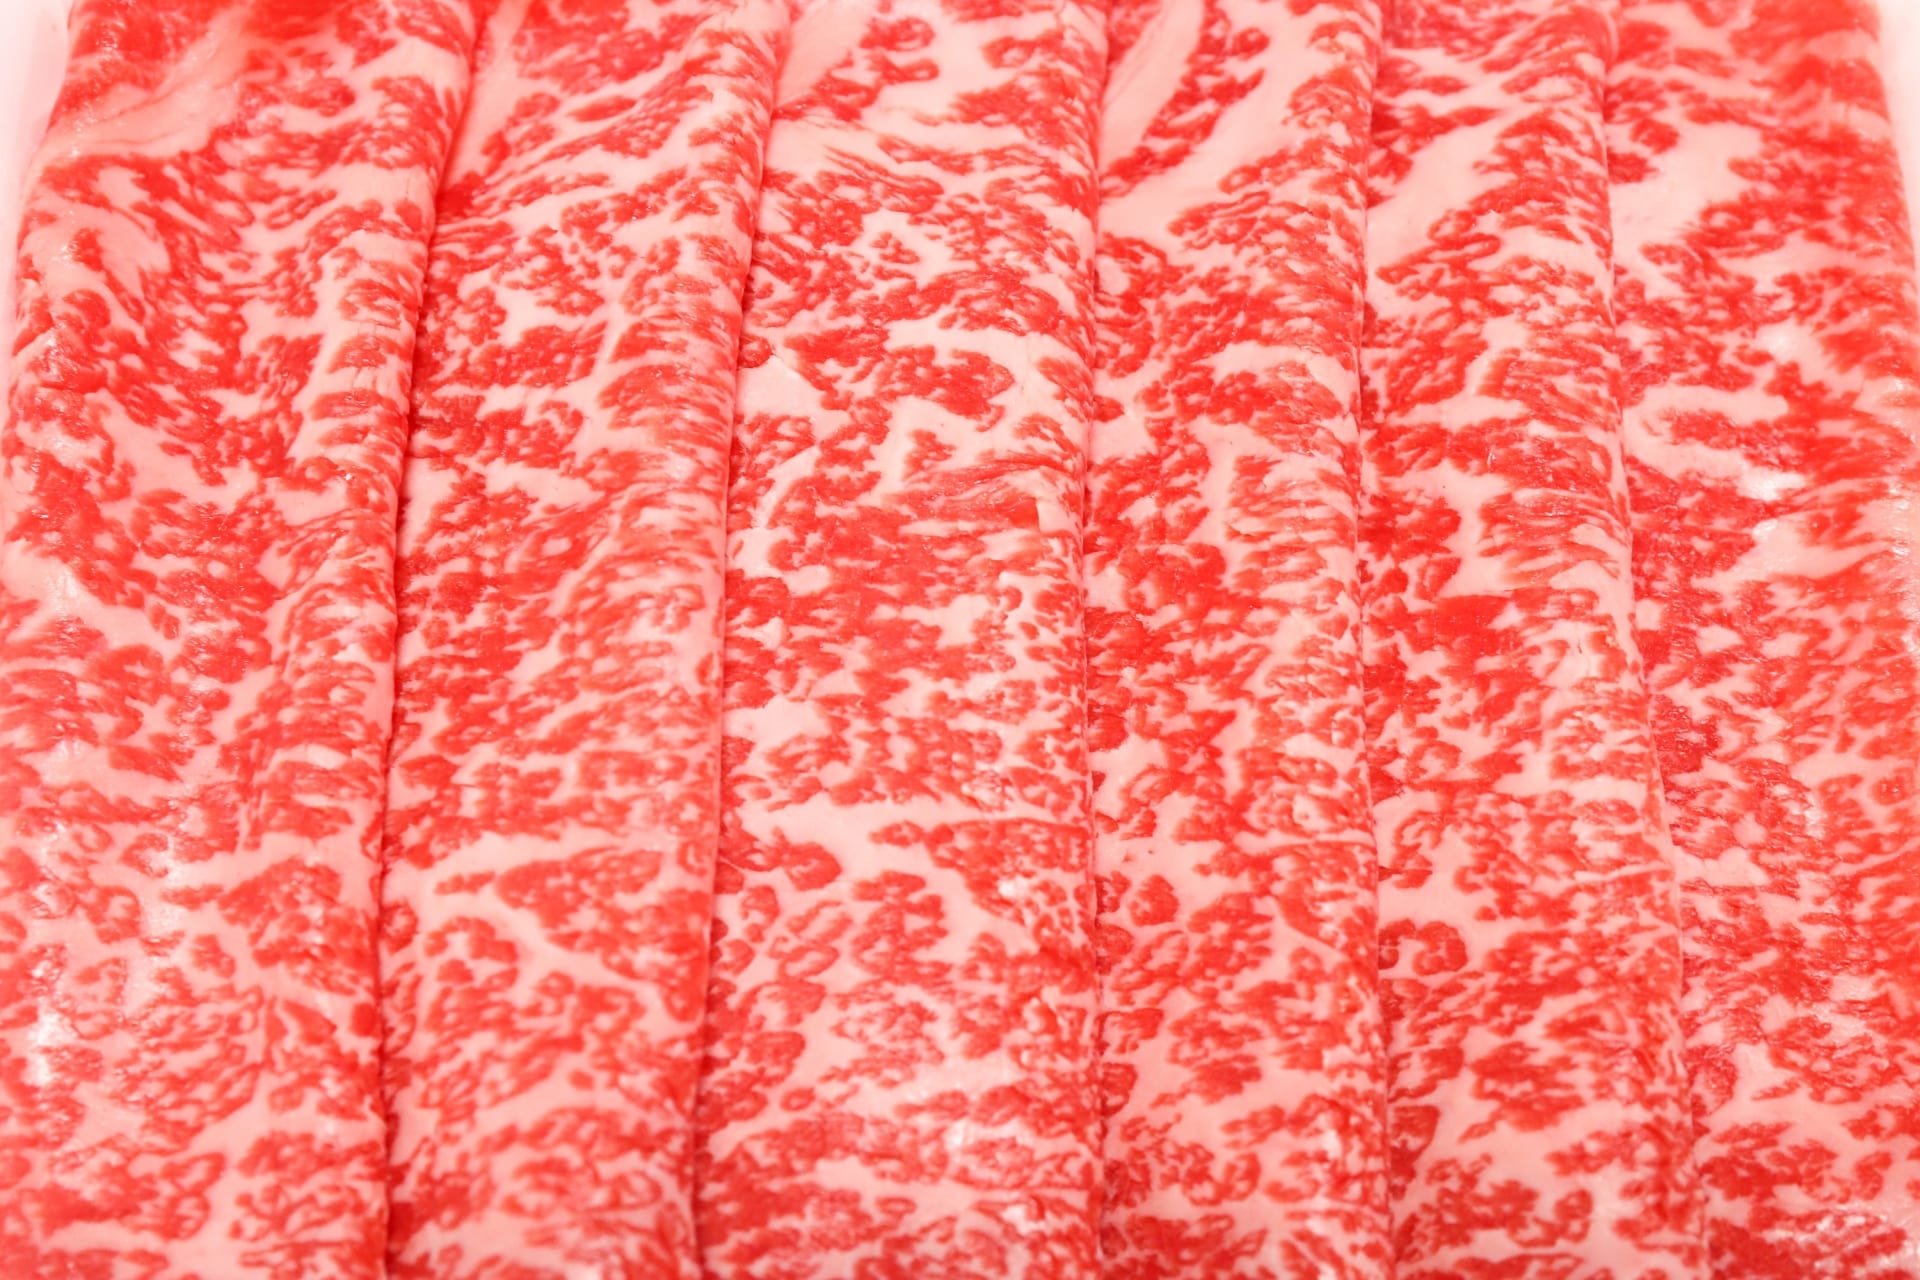 Marbled beef slices